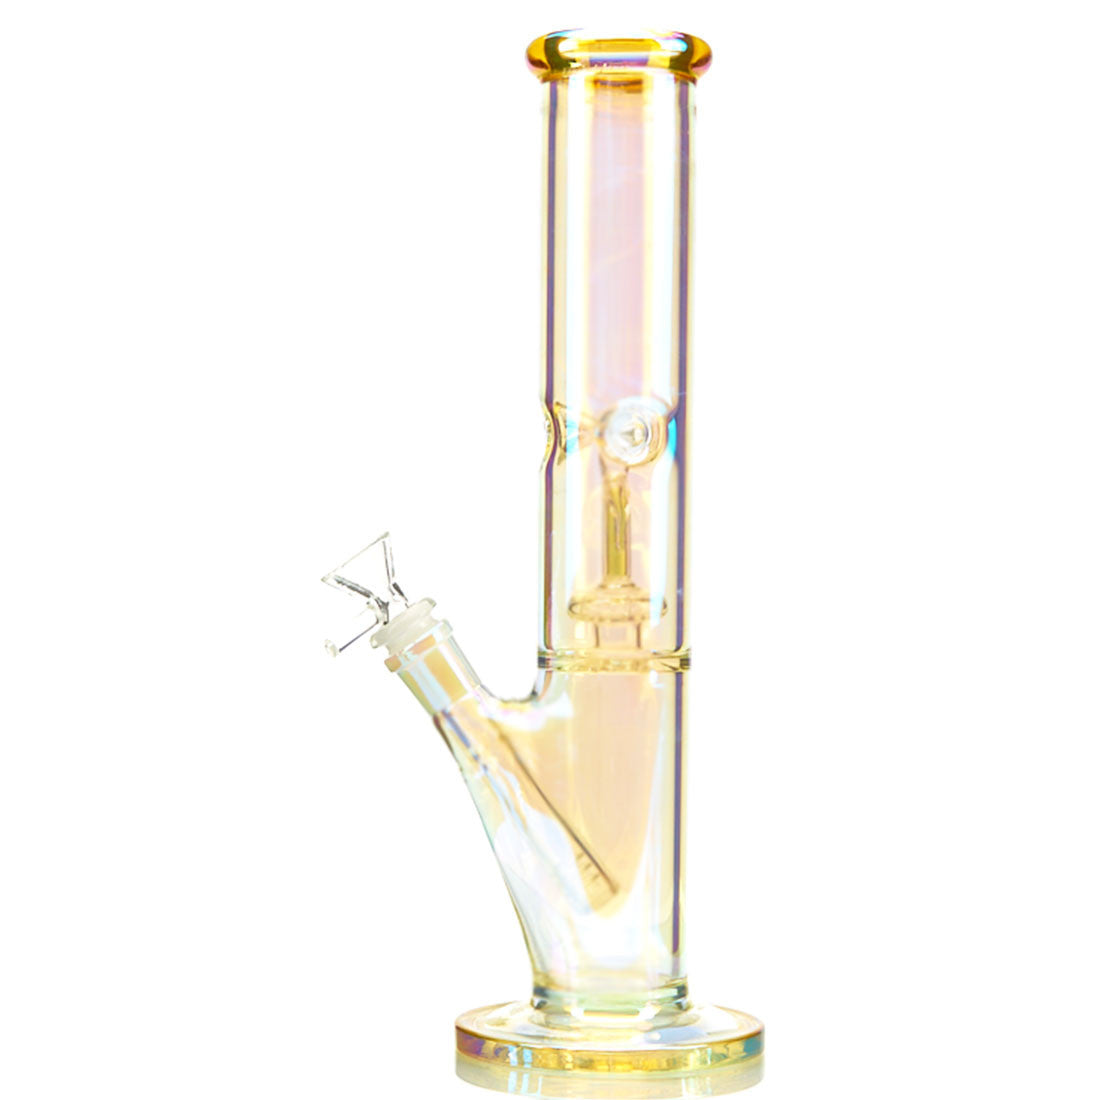 Gambino Glass Studios Straight Tube Anchor Water Pipe with peach and gold Iridescent glass